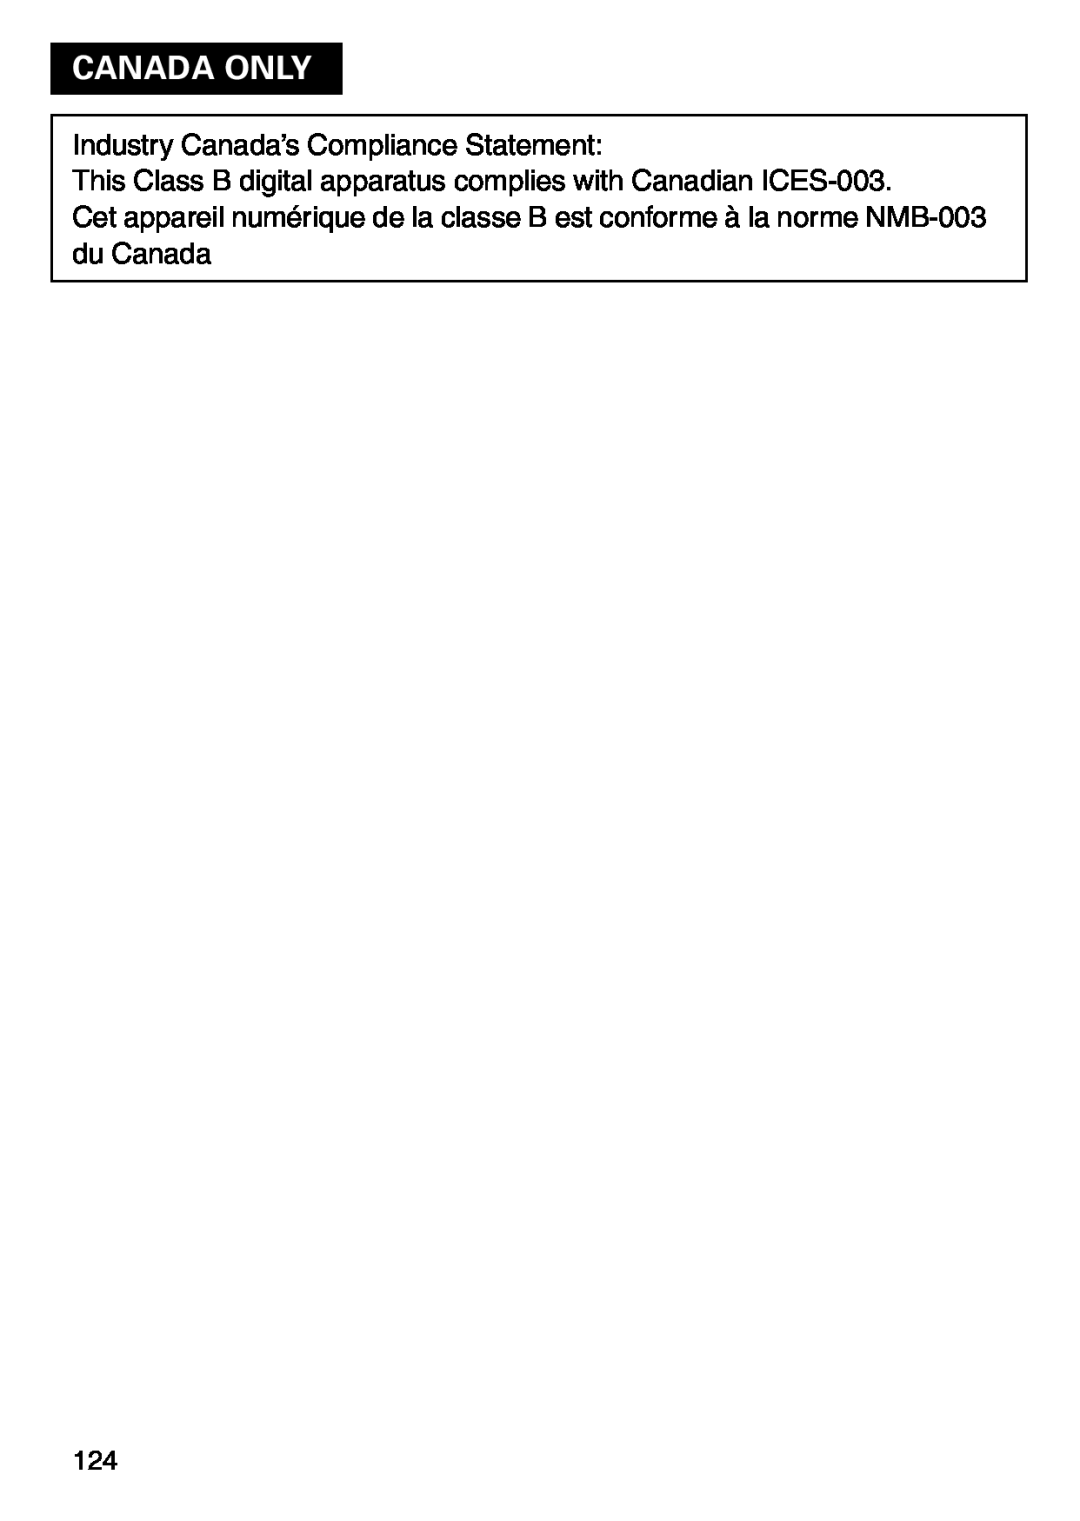 Konica Minolta KD-500Z user manual Canada Only, Industry Canada’s Compliance Statement 